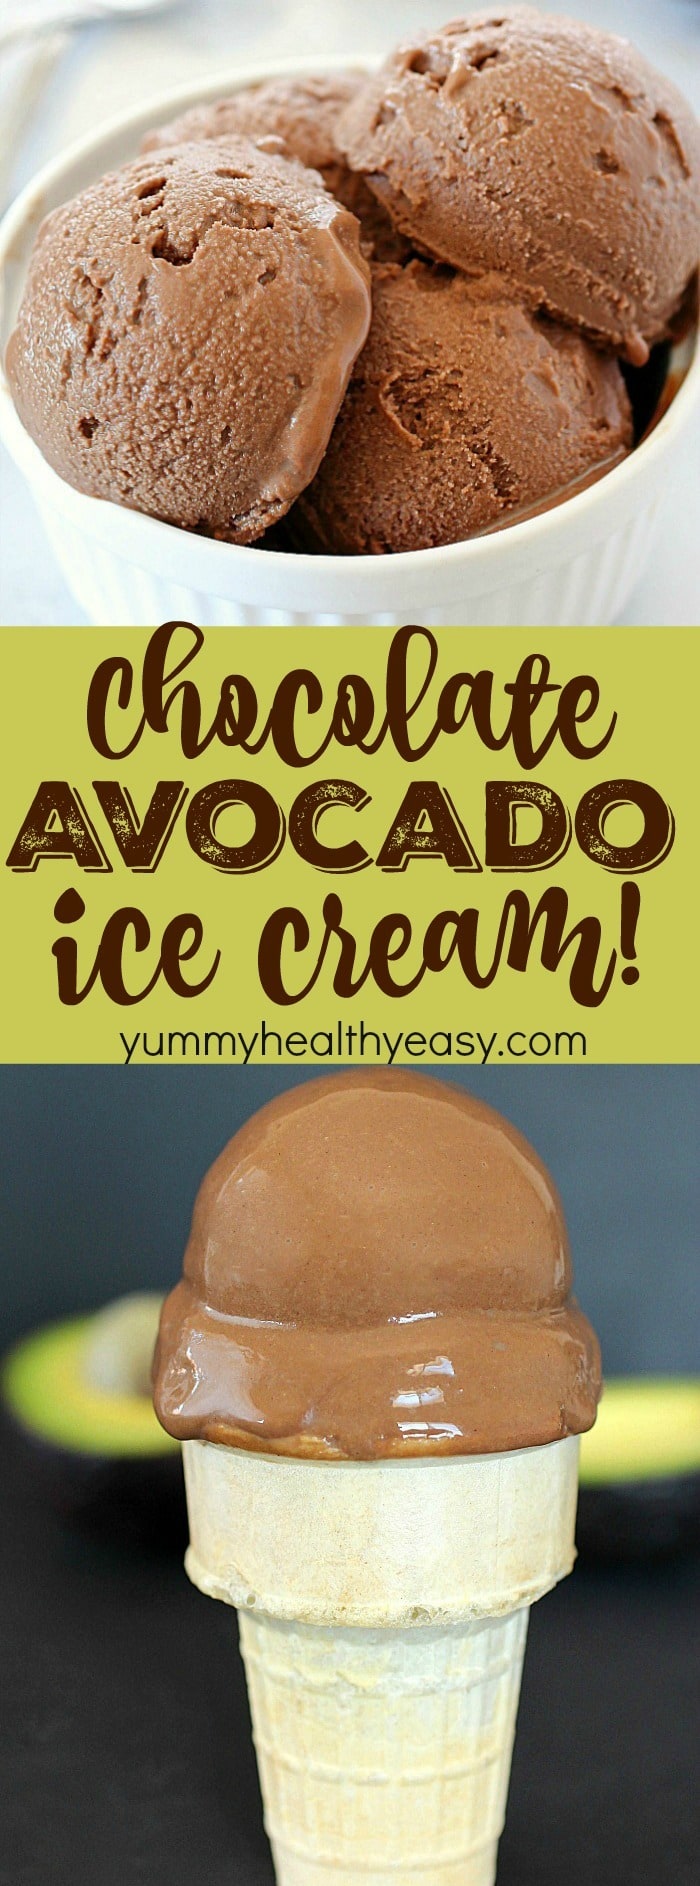 Homemade Chocolate Avocado Ice Cream that is so super easy to make, velvety and incredible! You won't even taste the avocado but will love the chocolate creaminess! AD